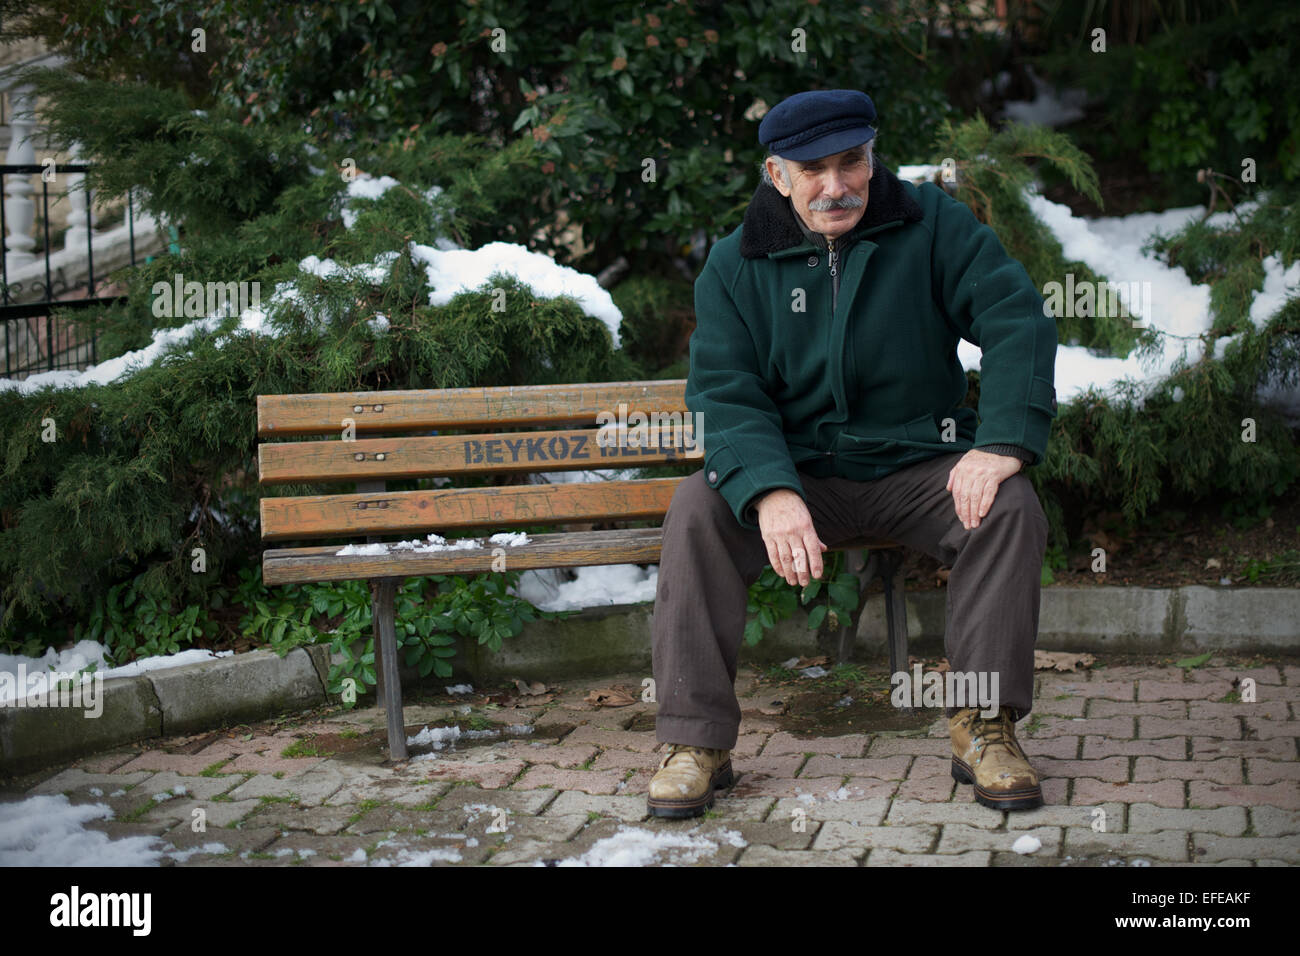 A local man in Anadolu Kavagi is pictured as part of a photo essay on winter breaks in Istanbul, Turkey. Stock Photo